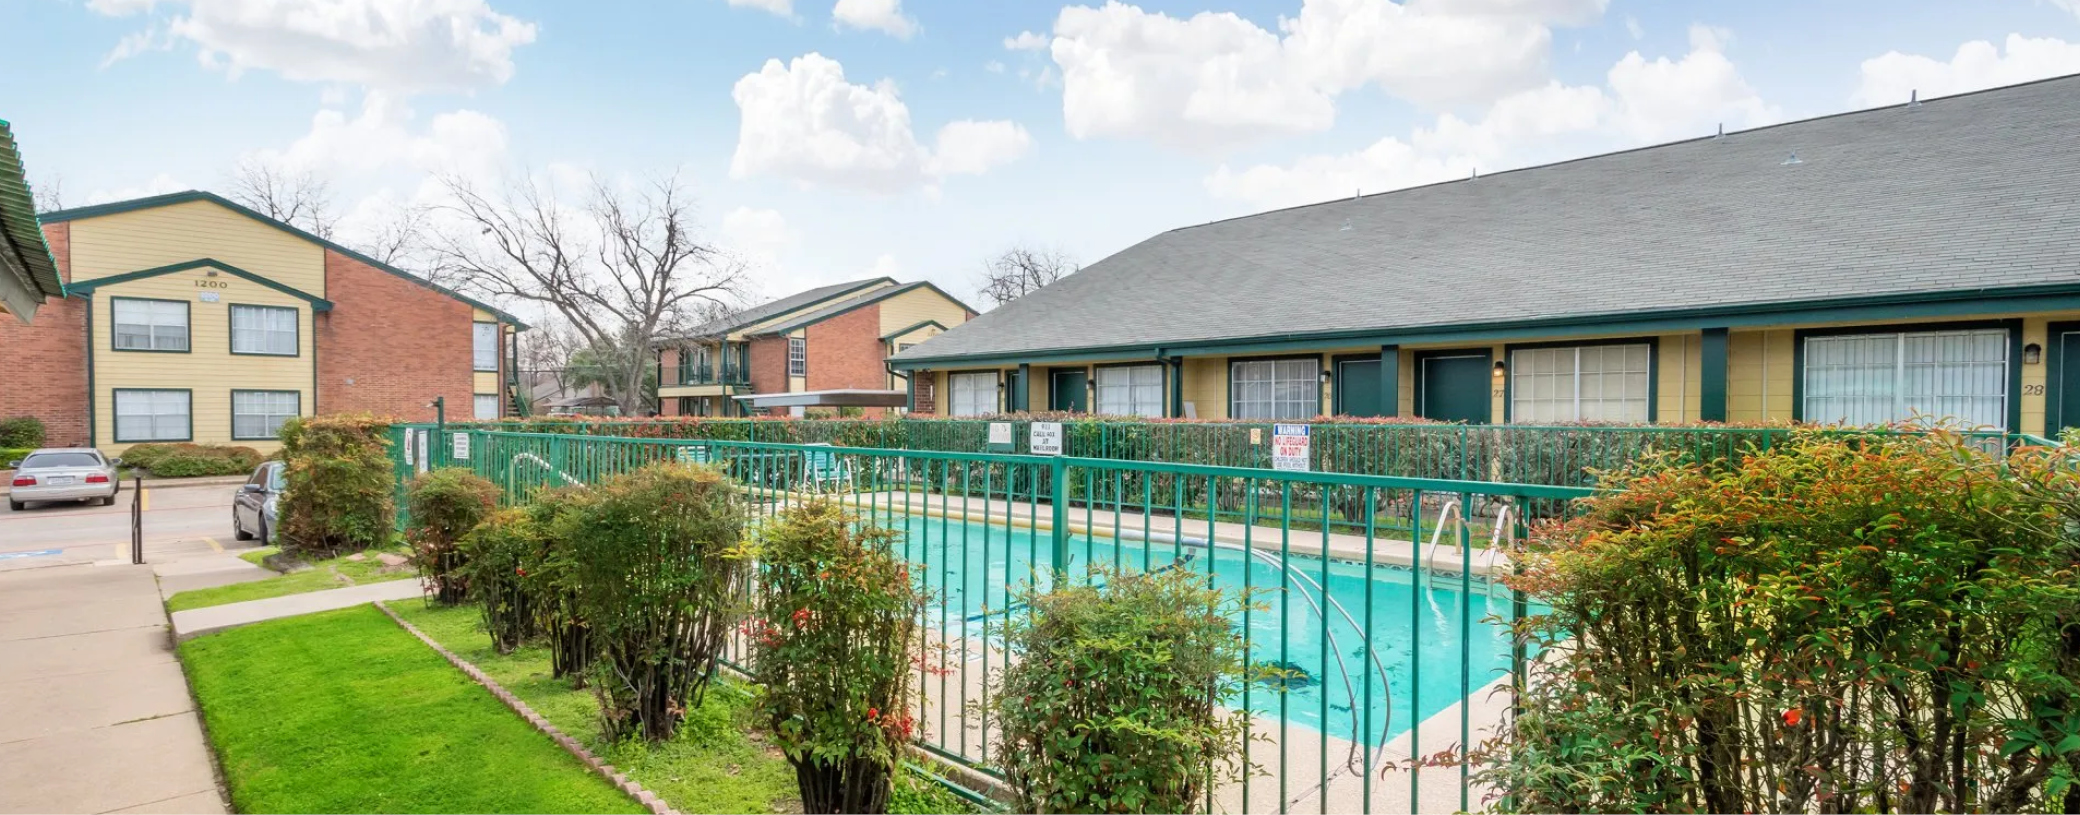 Brick and wood-paneled multifamily apartment, featuring a fenced outdoor pool and landscaped garden area.